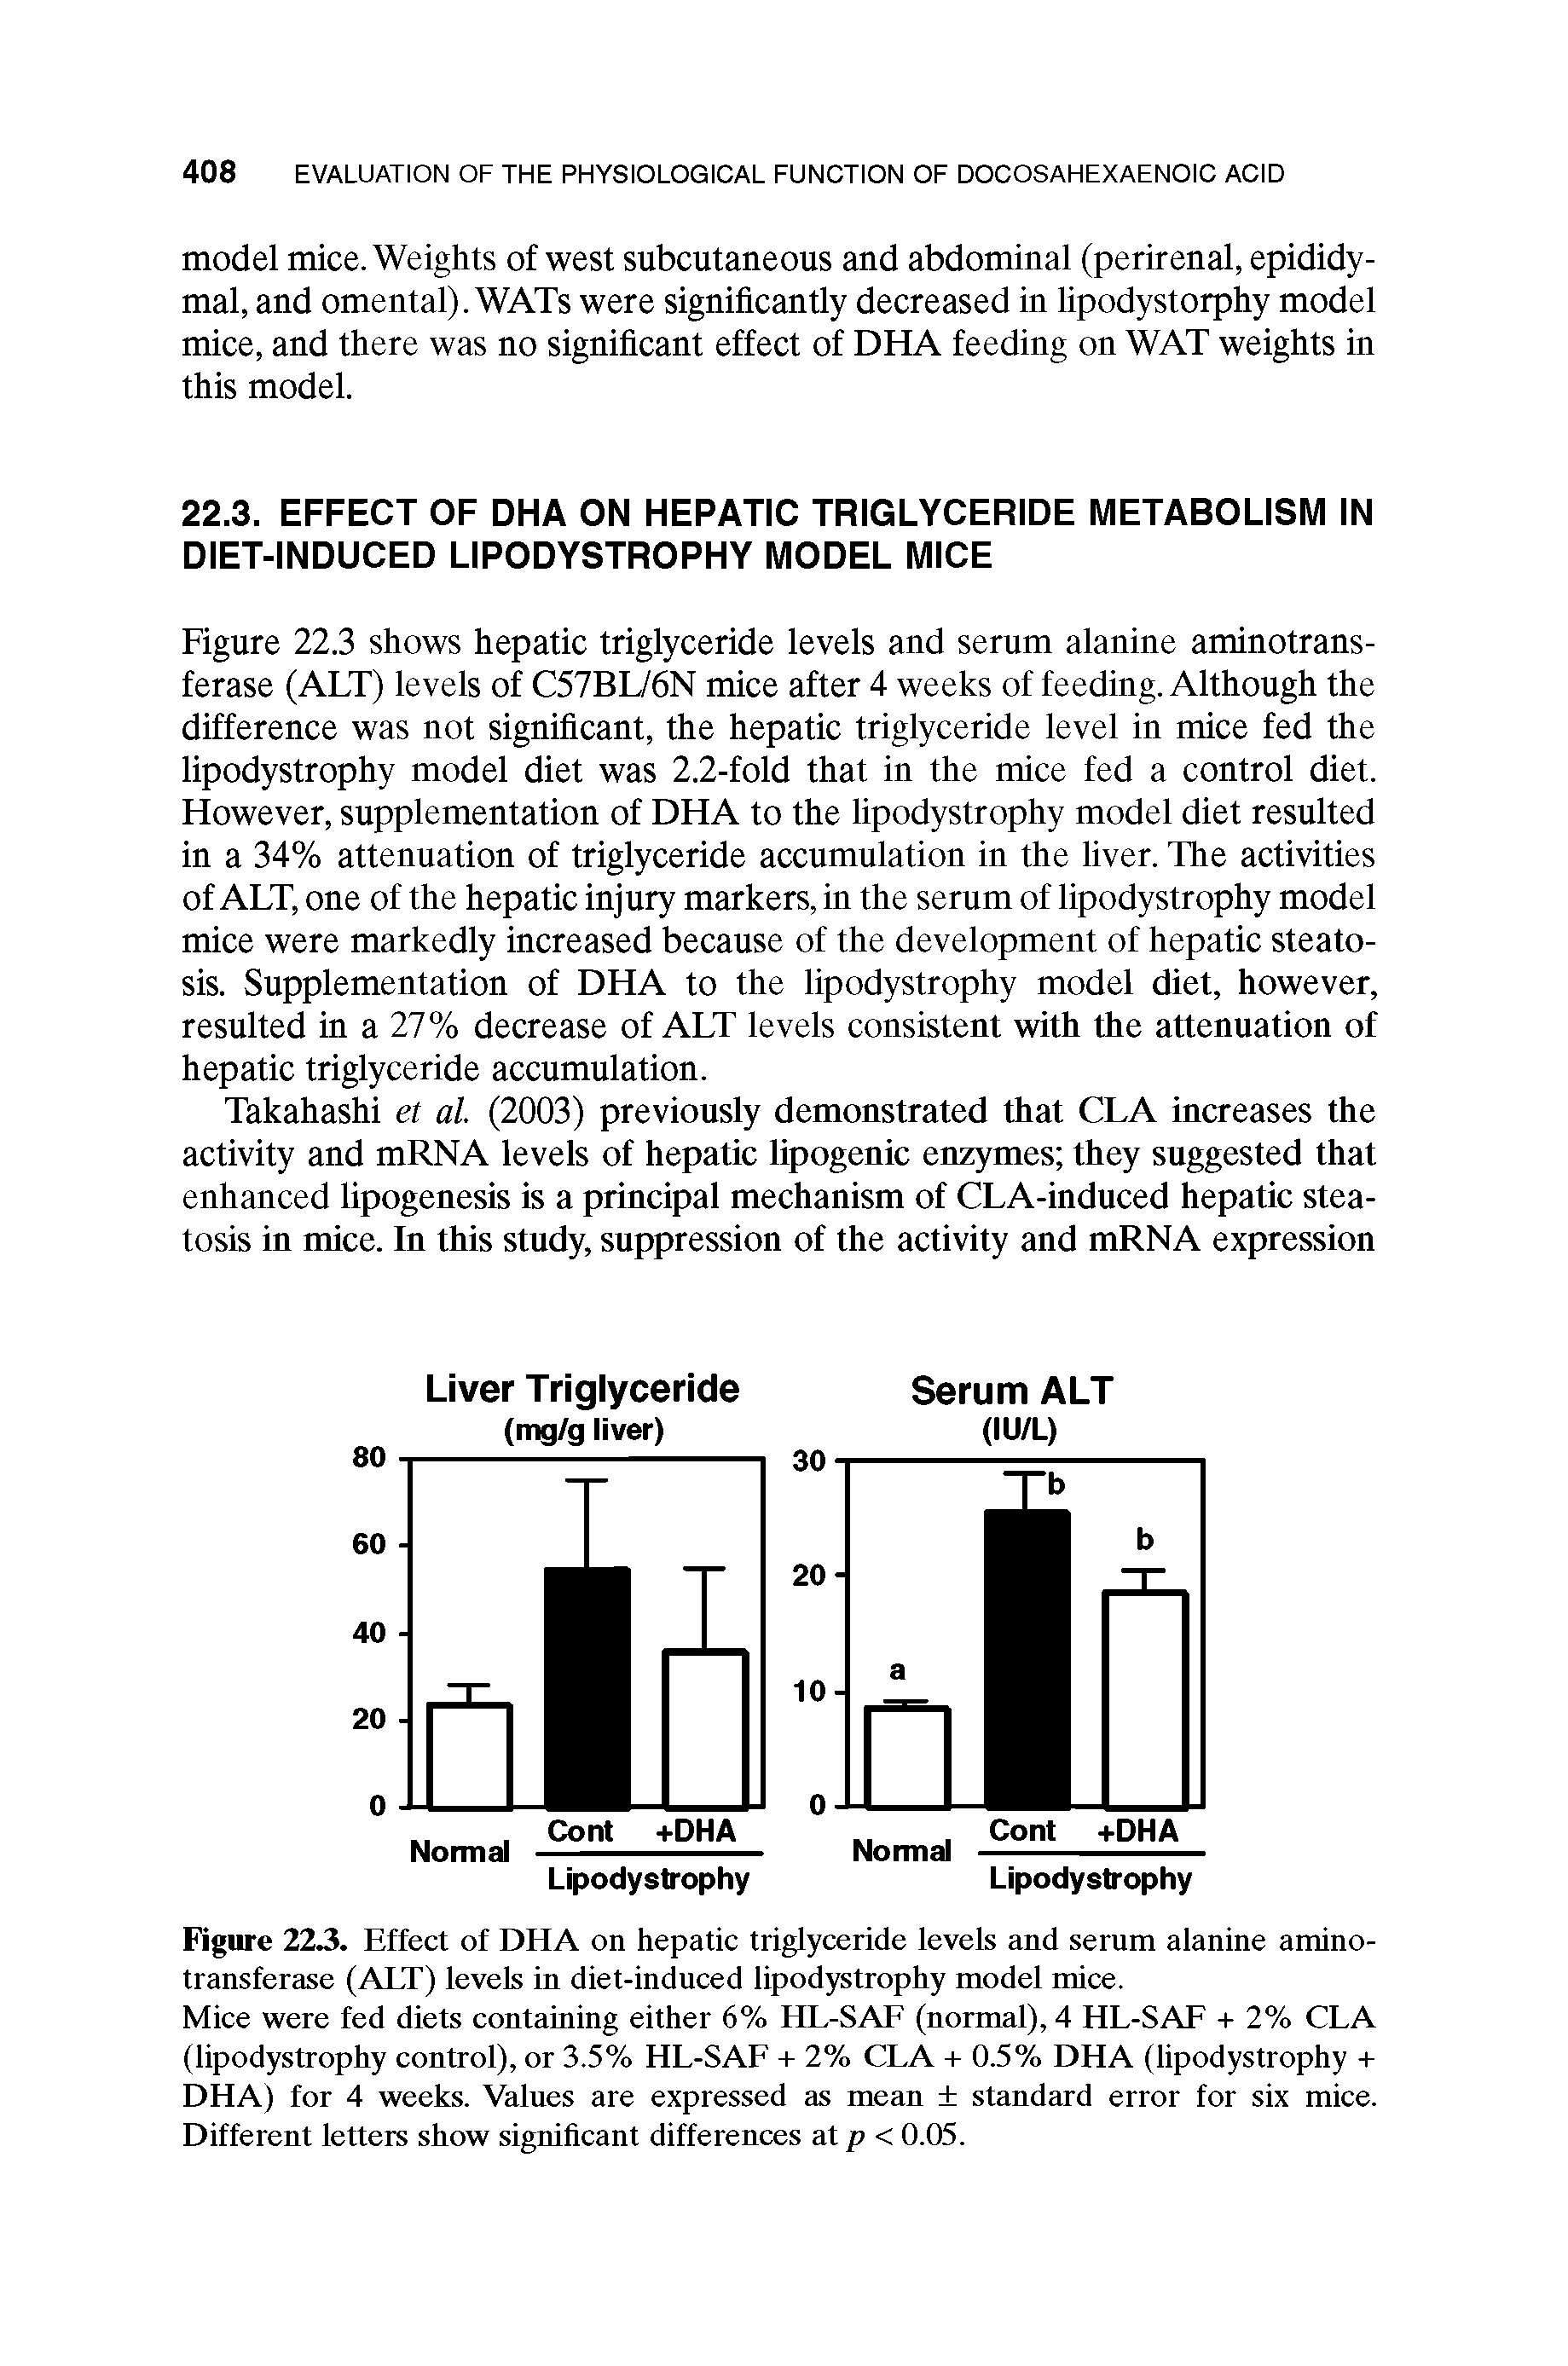 Figure 223. Effect of DHA on hepatic triglyceride levels and serum alanine aminotransferase (ALT) levels in diet-induced lipodystrophy model mice.